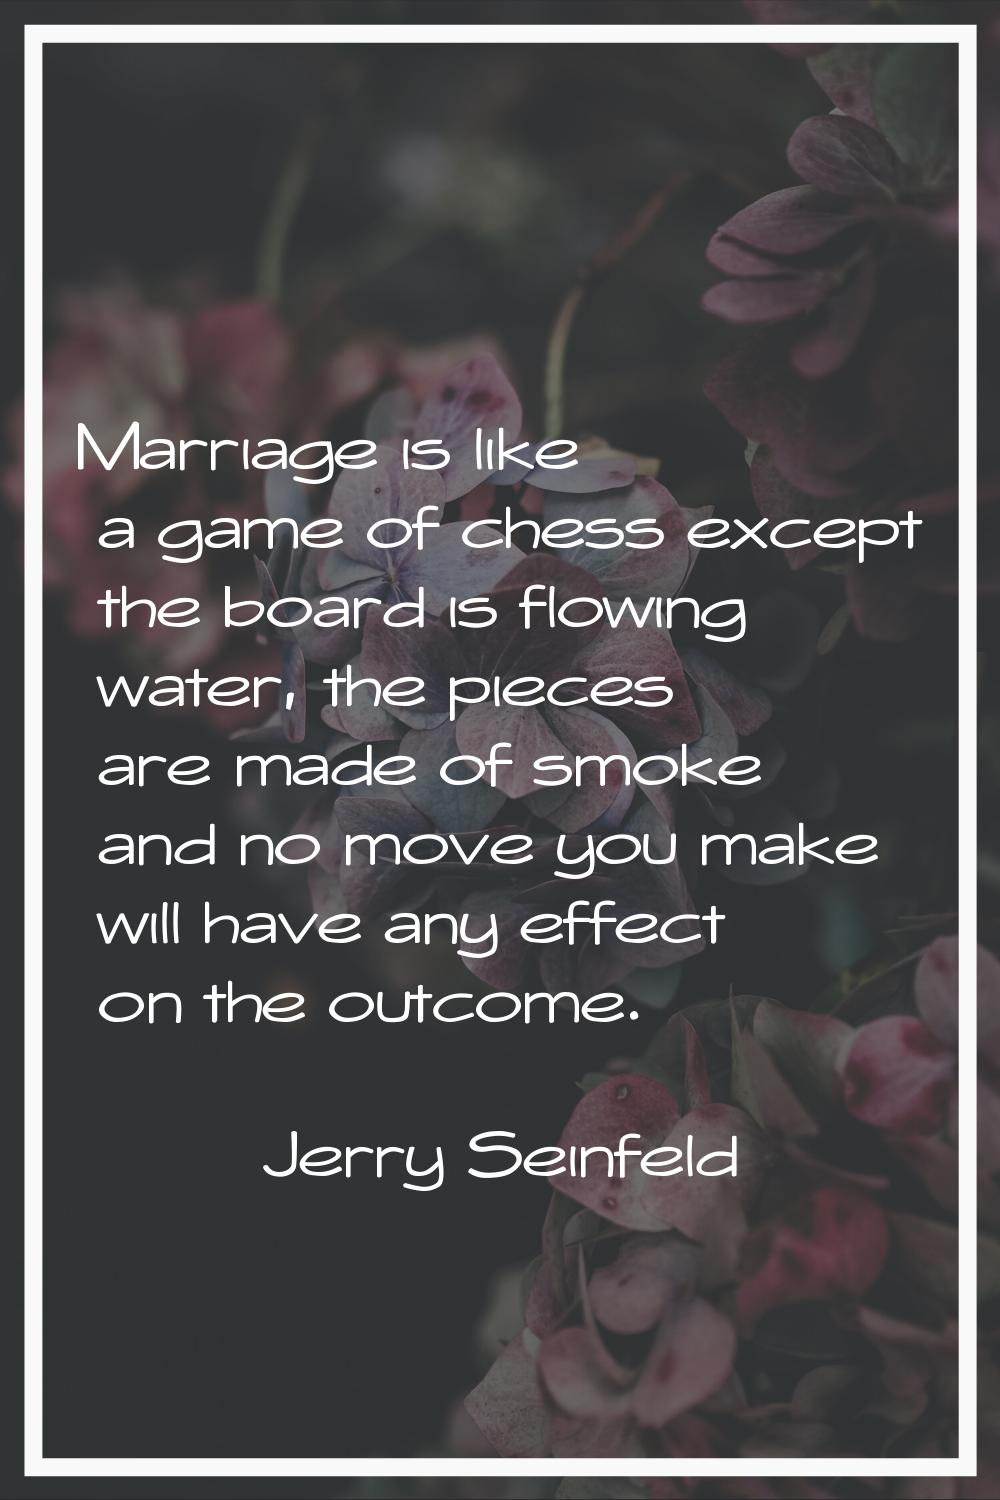 Marriage is like a game of chess except the board is flowing water, the pieces are made of smoke an